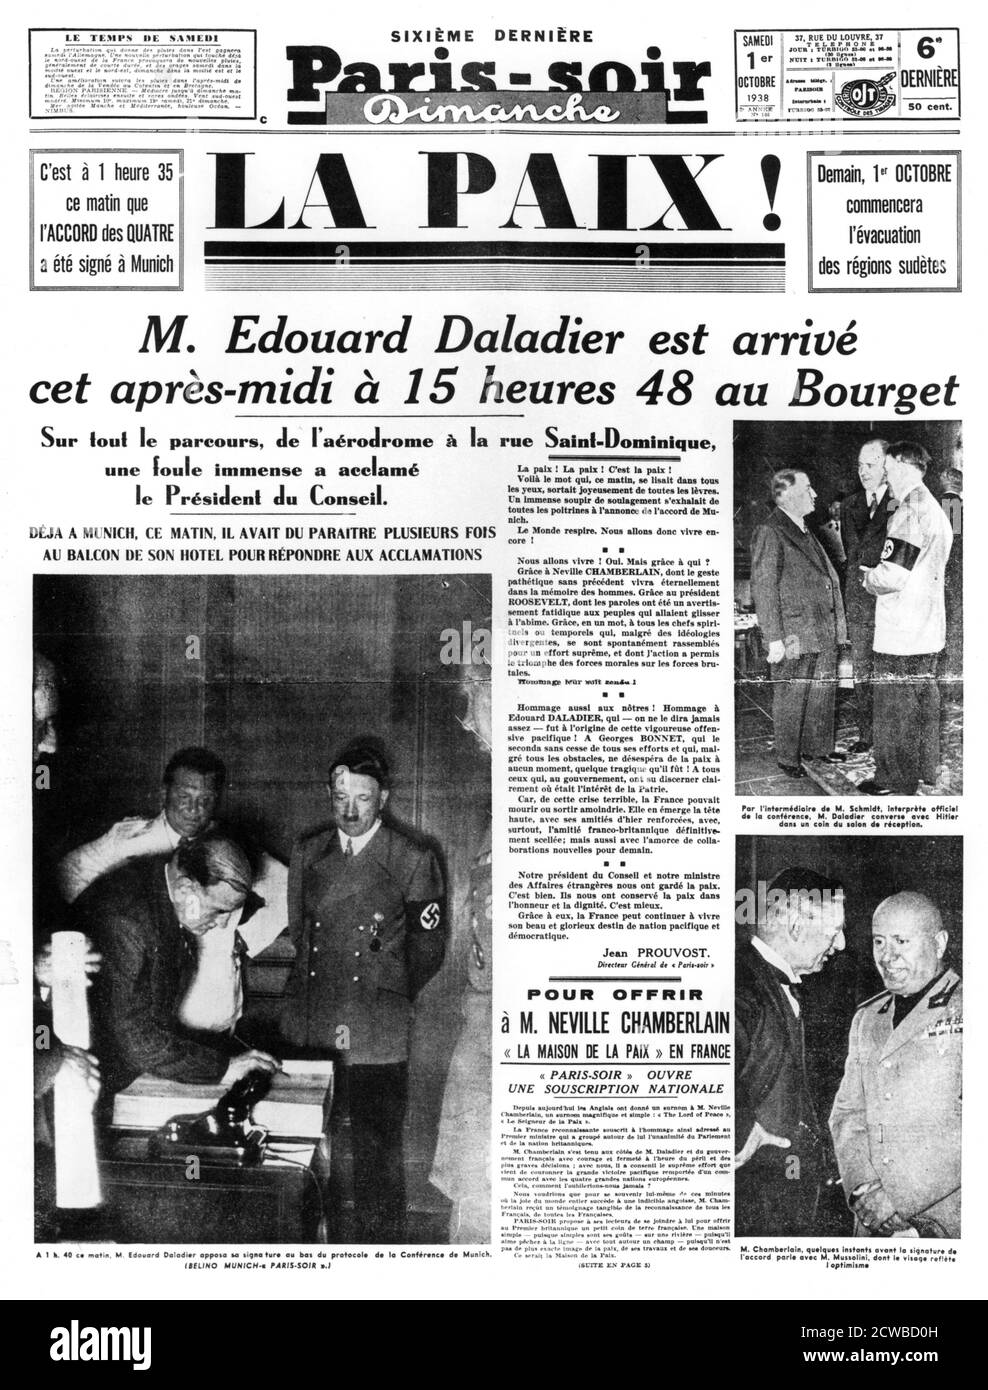 Peace!, front page of Paris-soir newspaper, 1 October 1938. The headline story reports the conclusion of the peace agreement at Munich between Britain, France and Germany that would provide peace in our time in the words of Neville Chamberlain. Within a year, Europe was at war. The photographs show French Prime Minister Edouard Daladier signing the accord watched by Hitler and Hermann Goering, Daladier and Hitler in conversation and Chamberlain talking to Benito Mussoloni. The photographer is unknown. Stock Photo